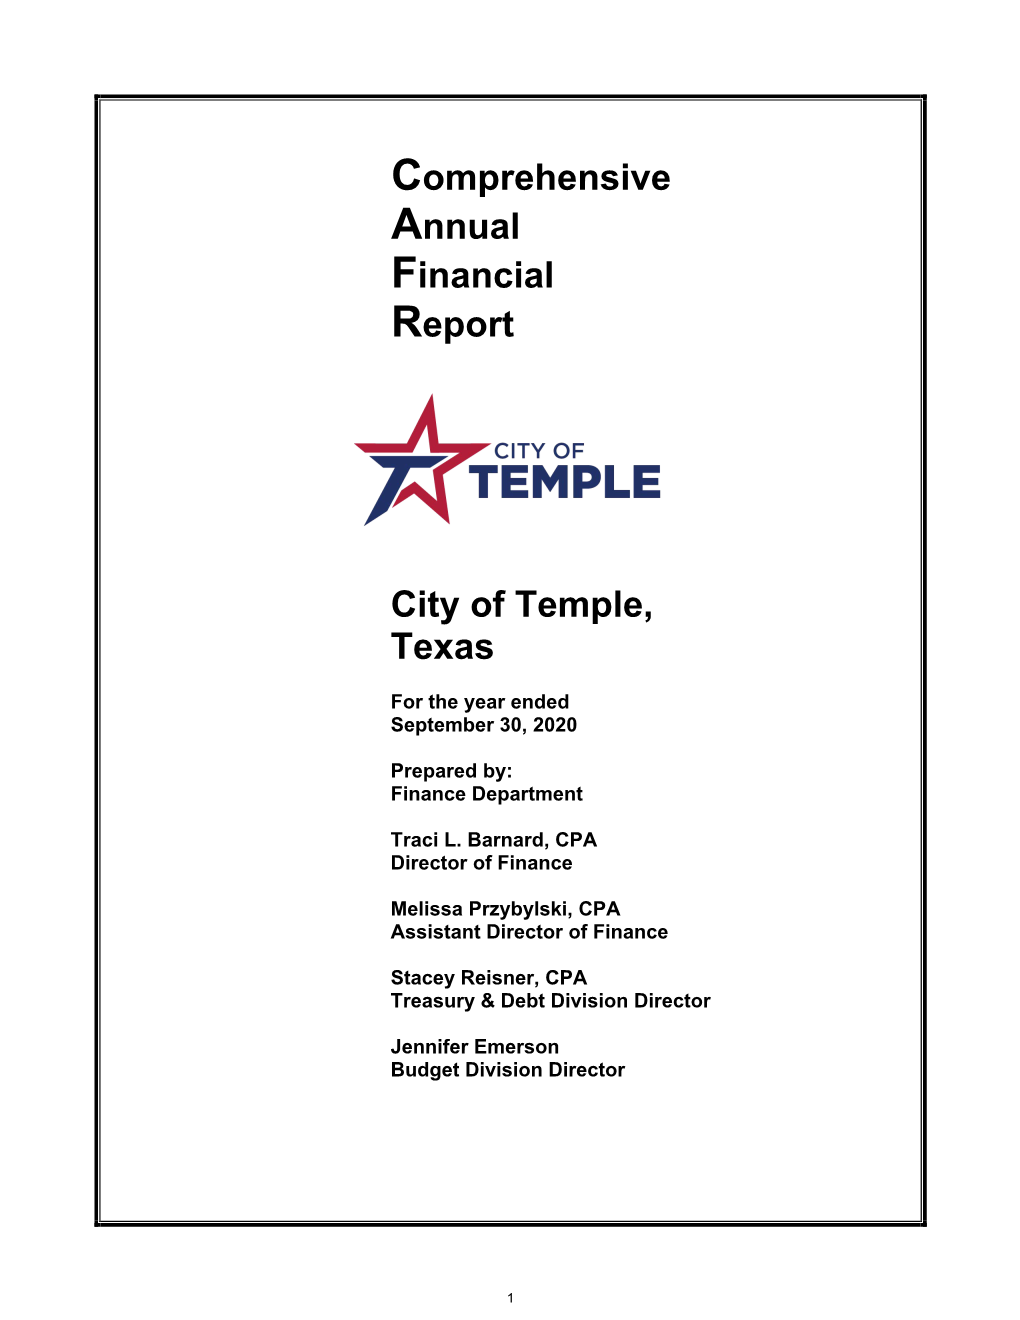 Comprehensive Annual Financial Report City of Temple, Texas